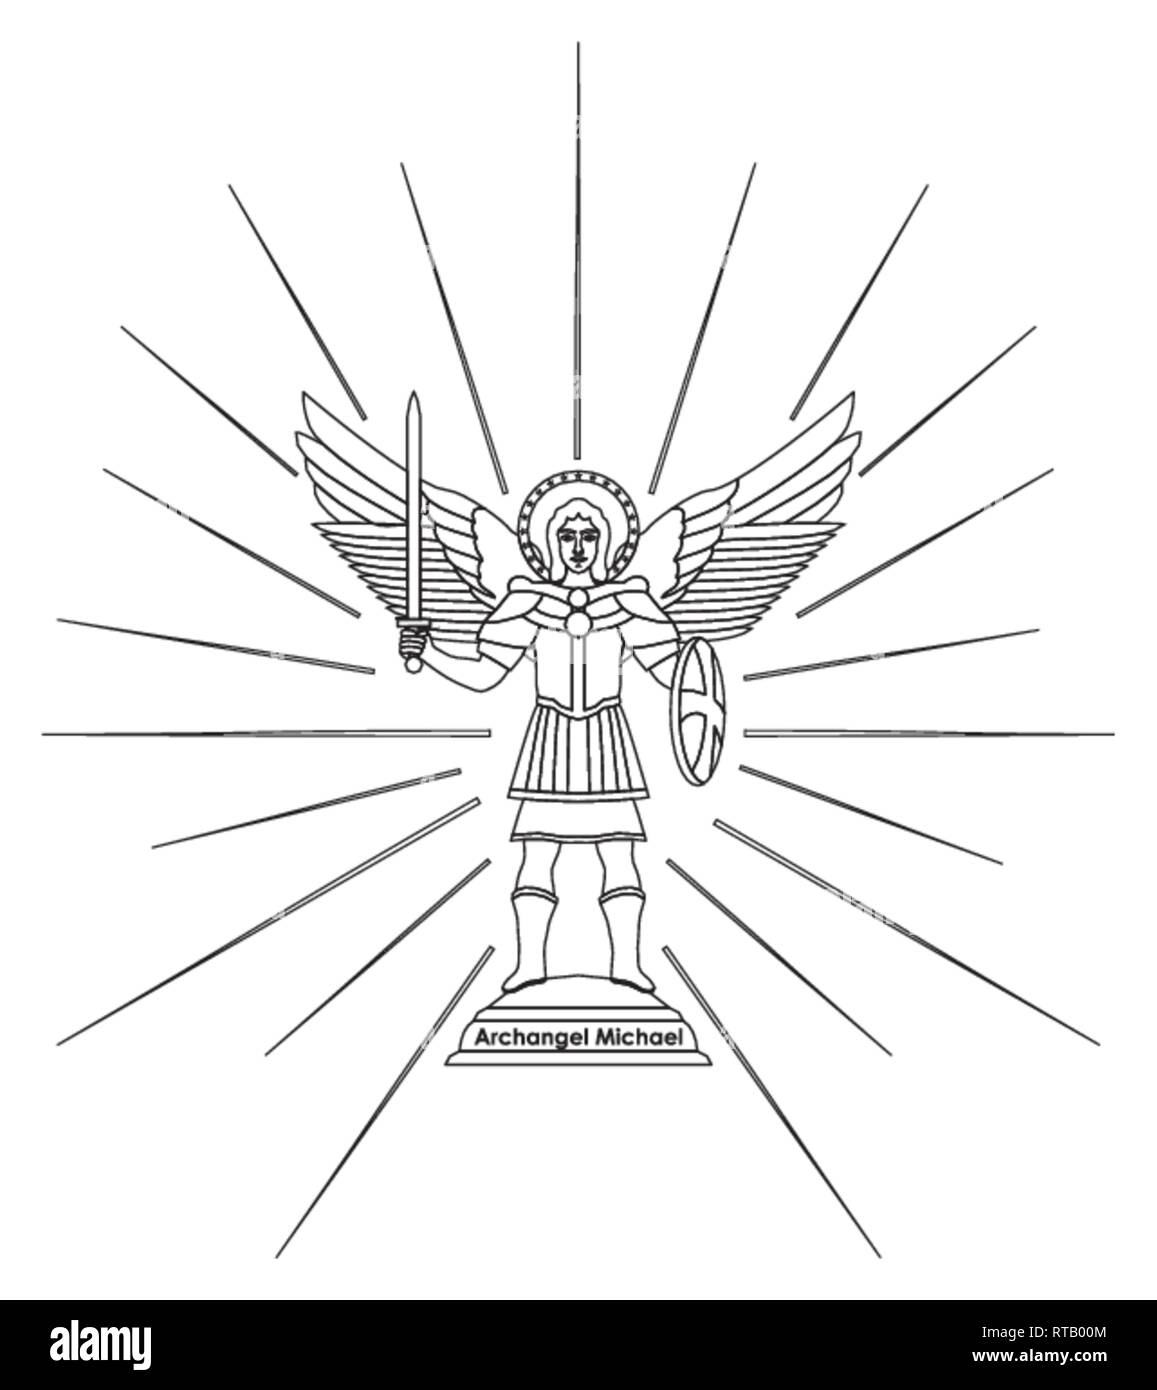 Archangel Michael. Outline only Stock Vector